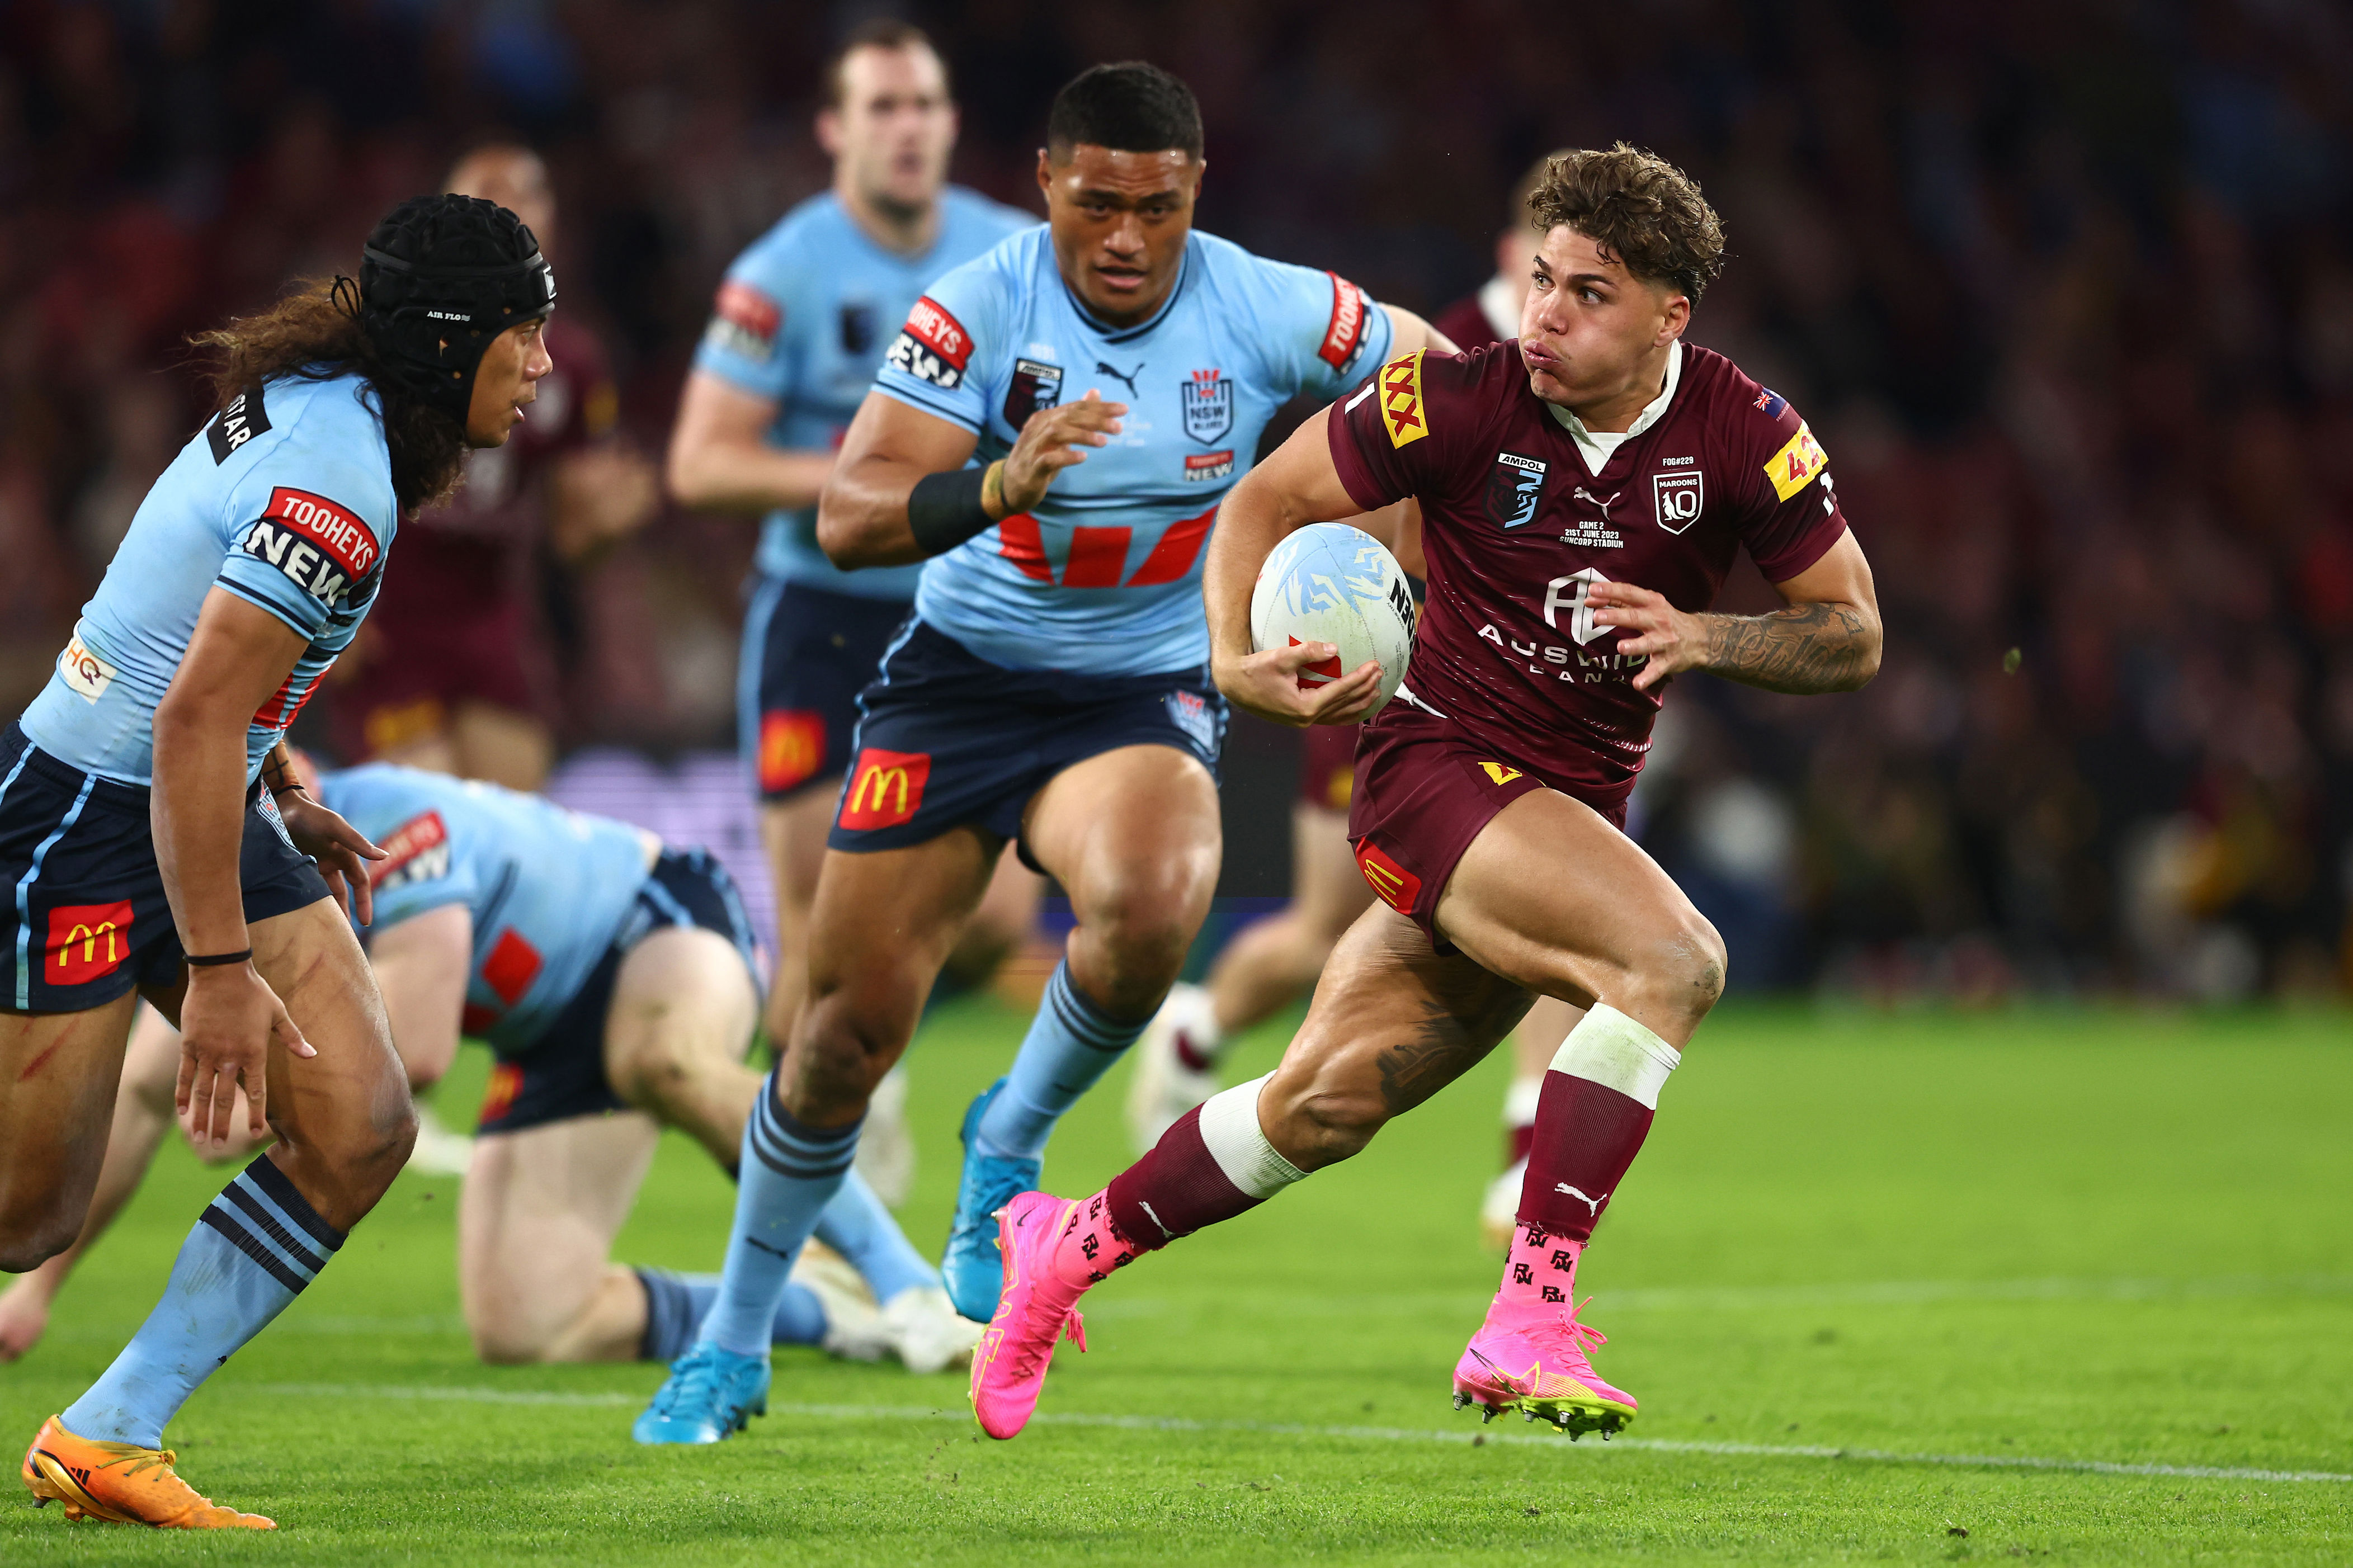 legends weigh in on 'neck and neck' maroons headache